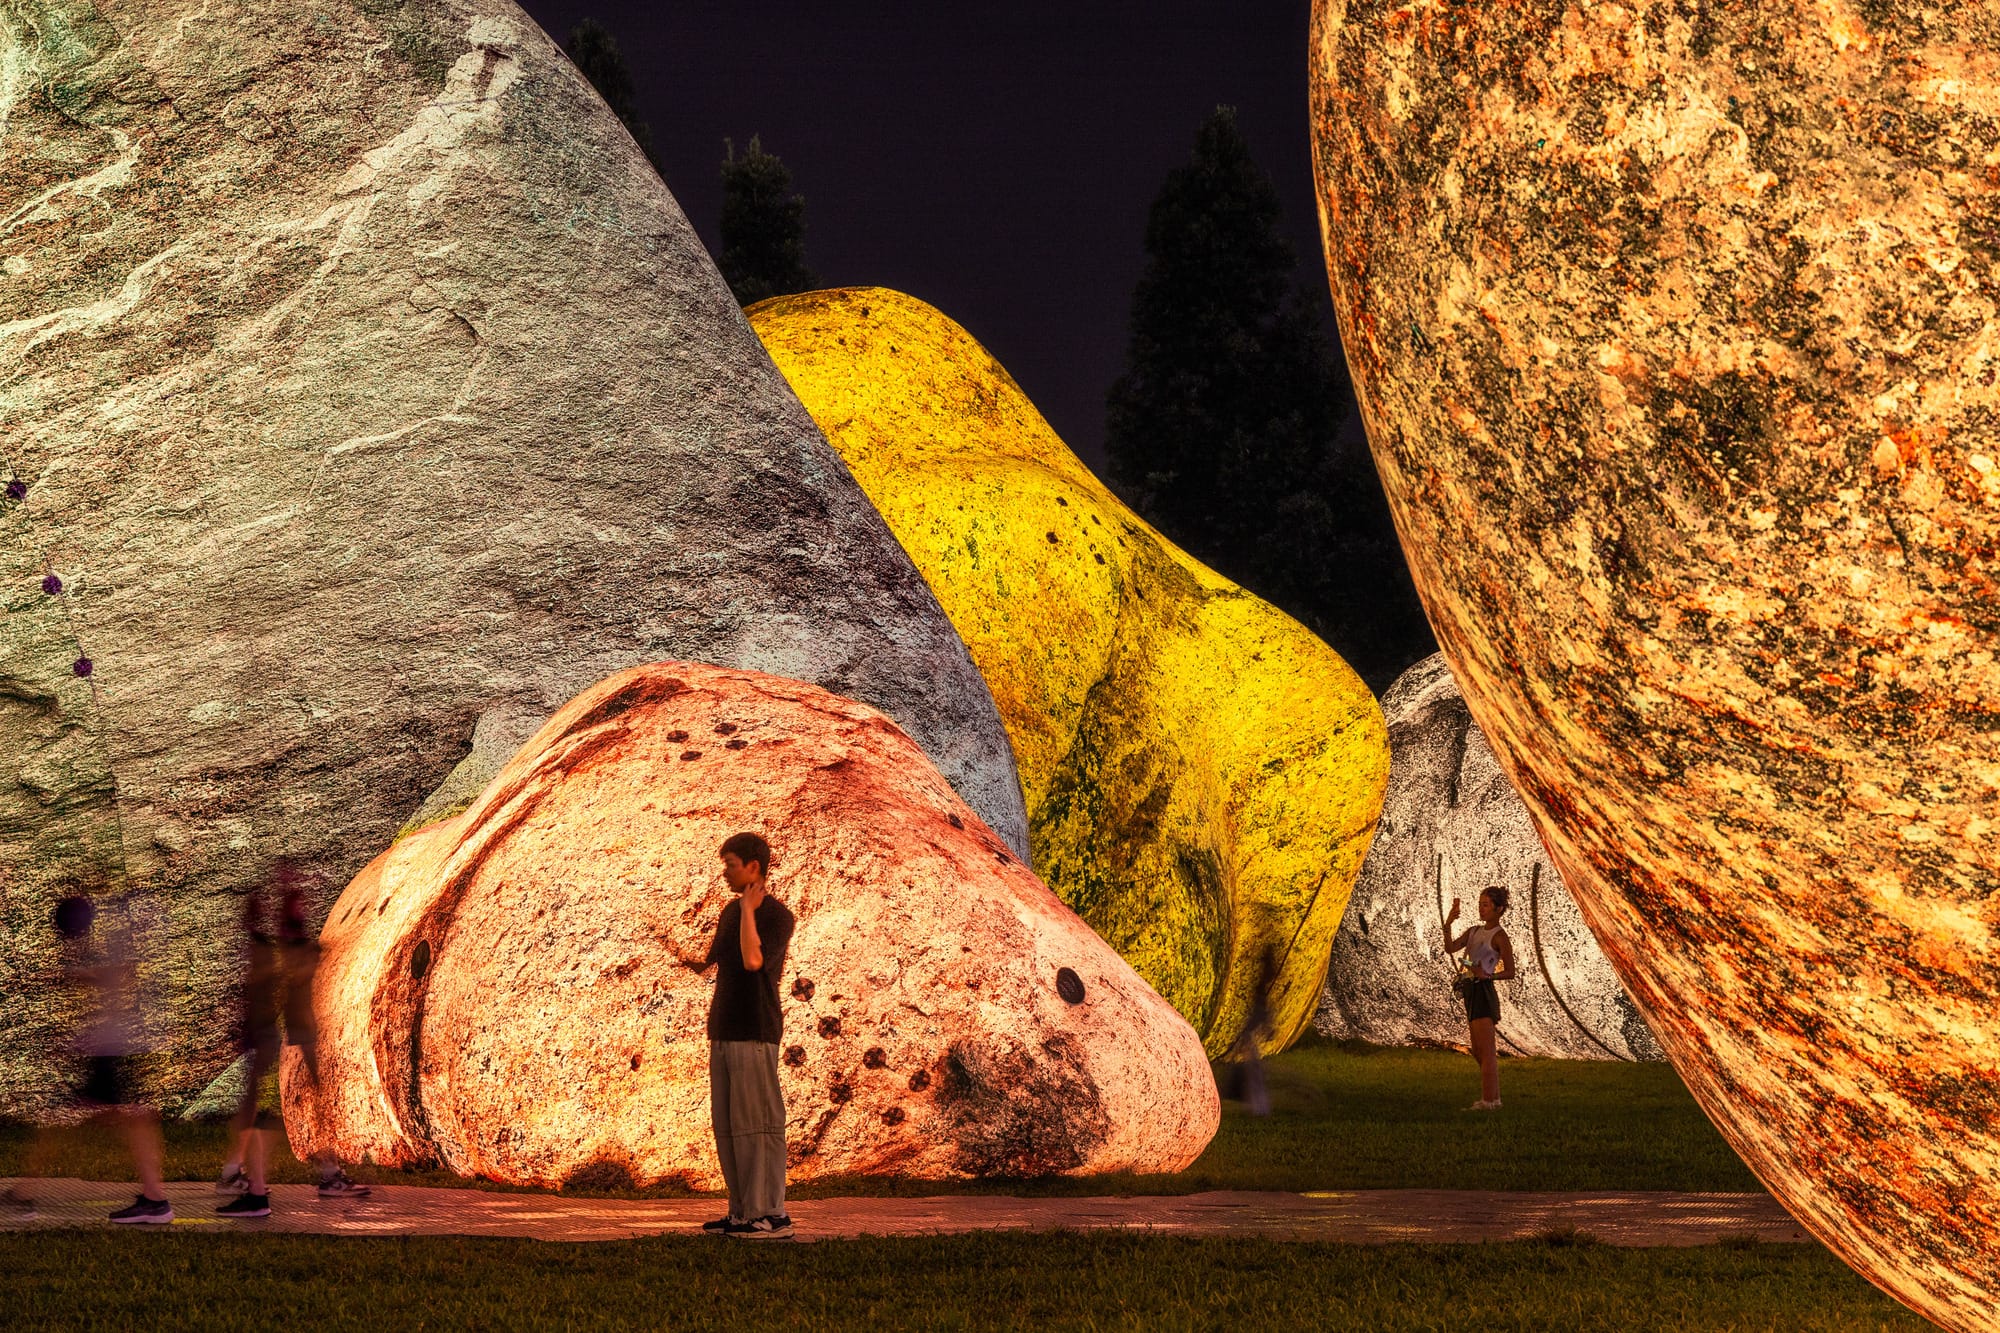 towering rocks rest in a park in glowing hues of peach, tan, and yellow. passerby observe.